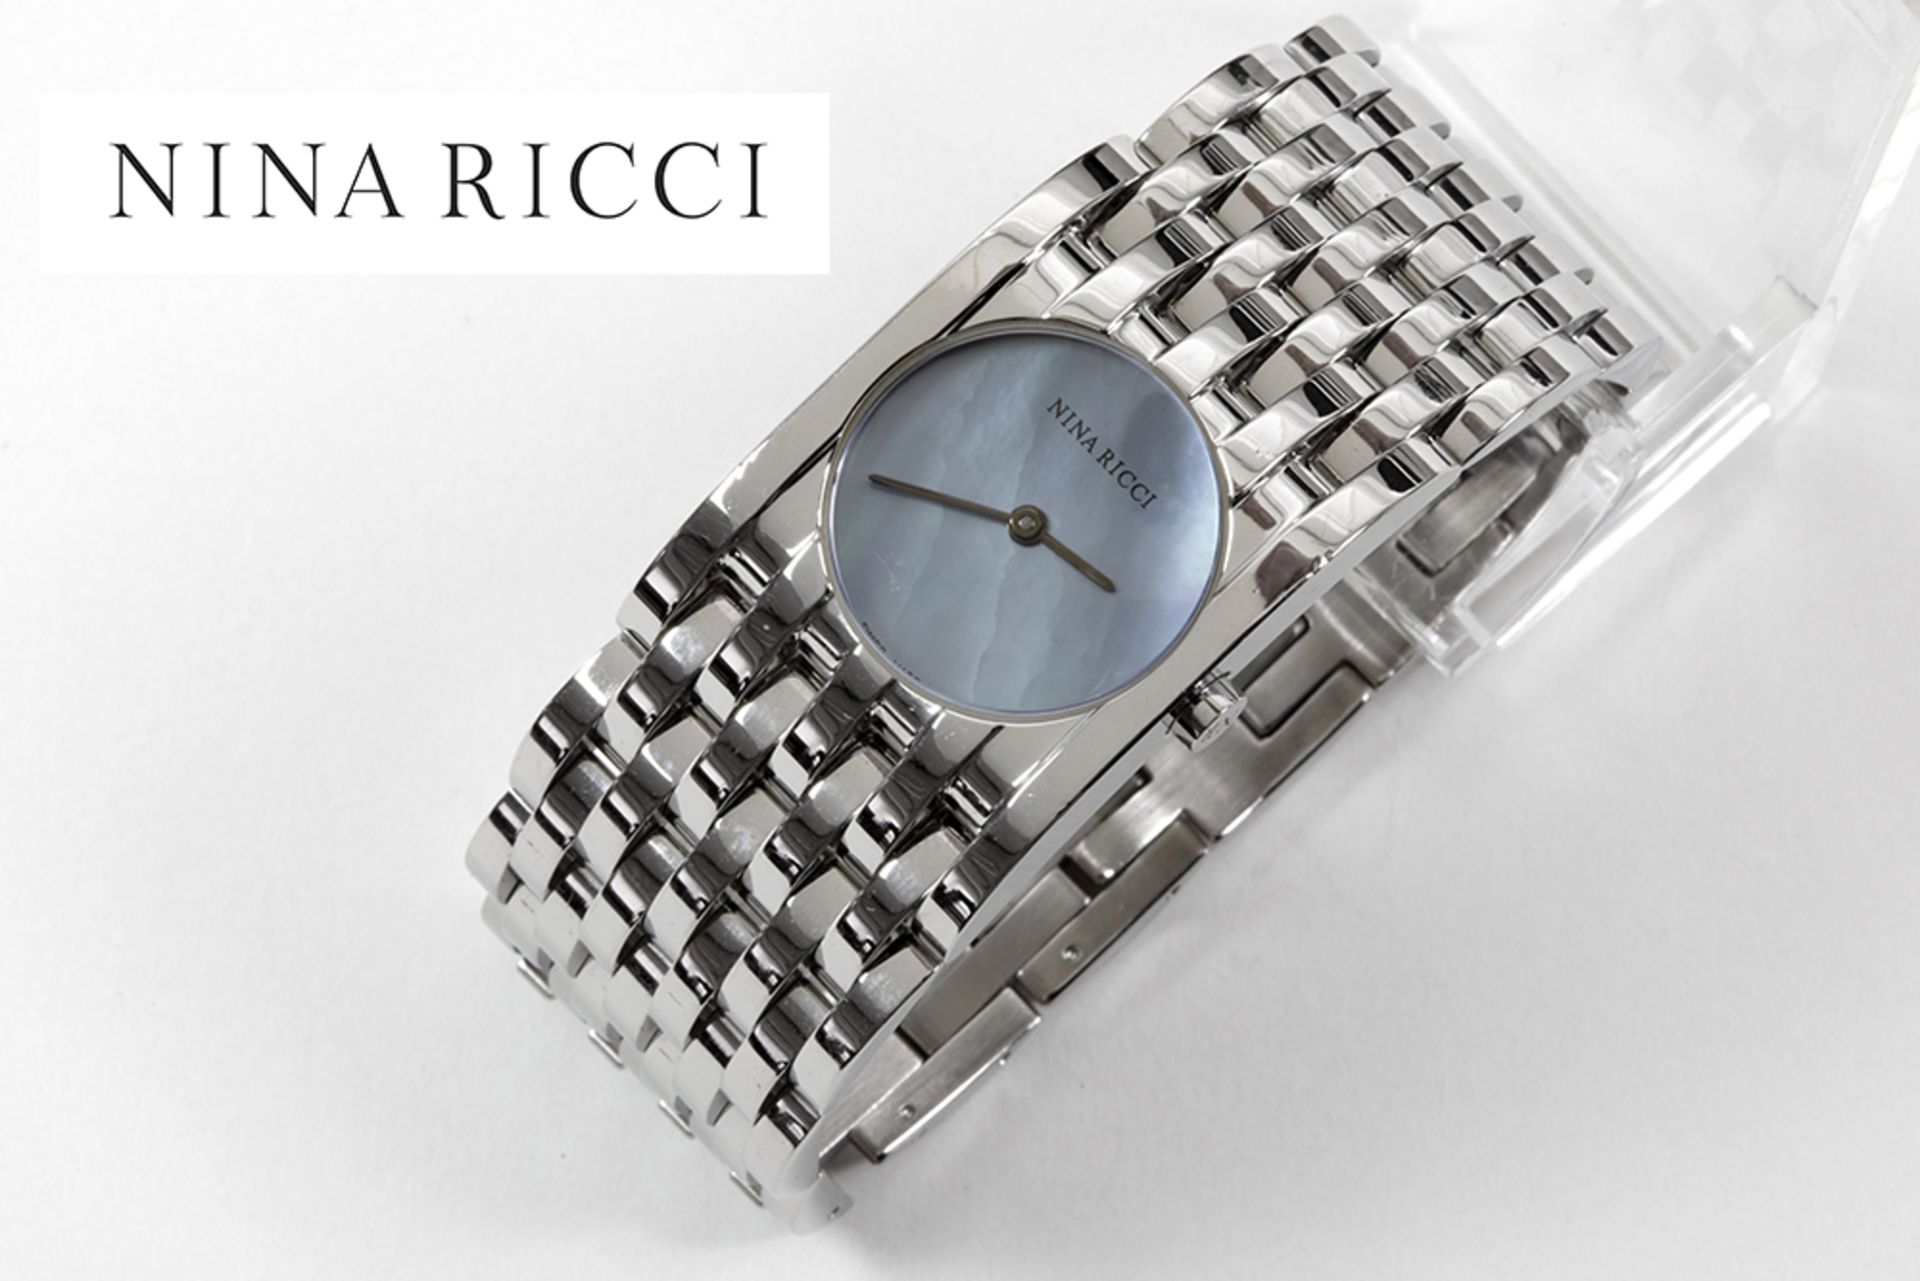 completely original quartz Nina Ricci ladies' wristwatch in steel with mother of pearl face - marked